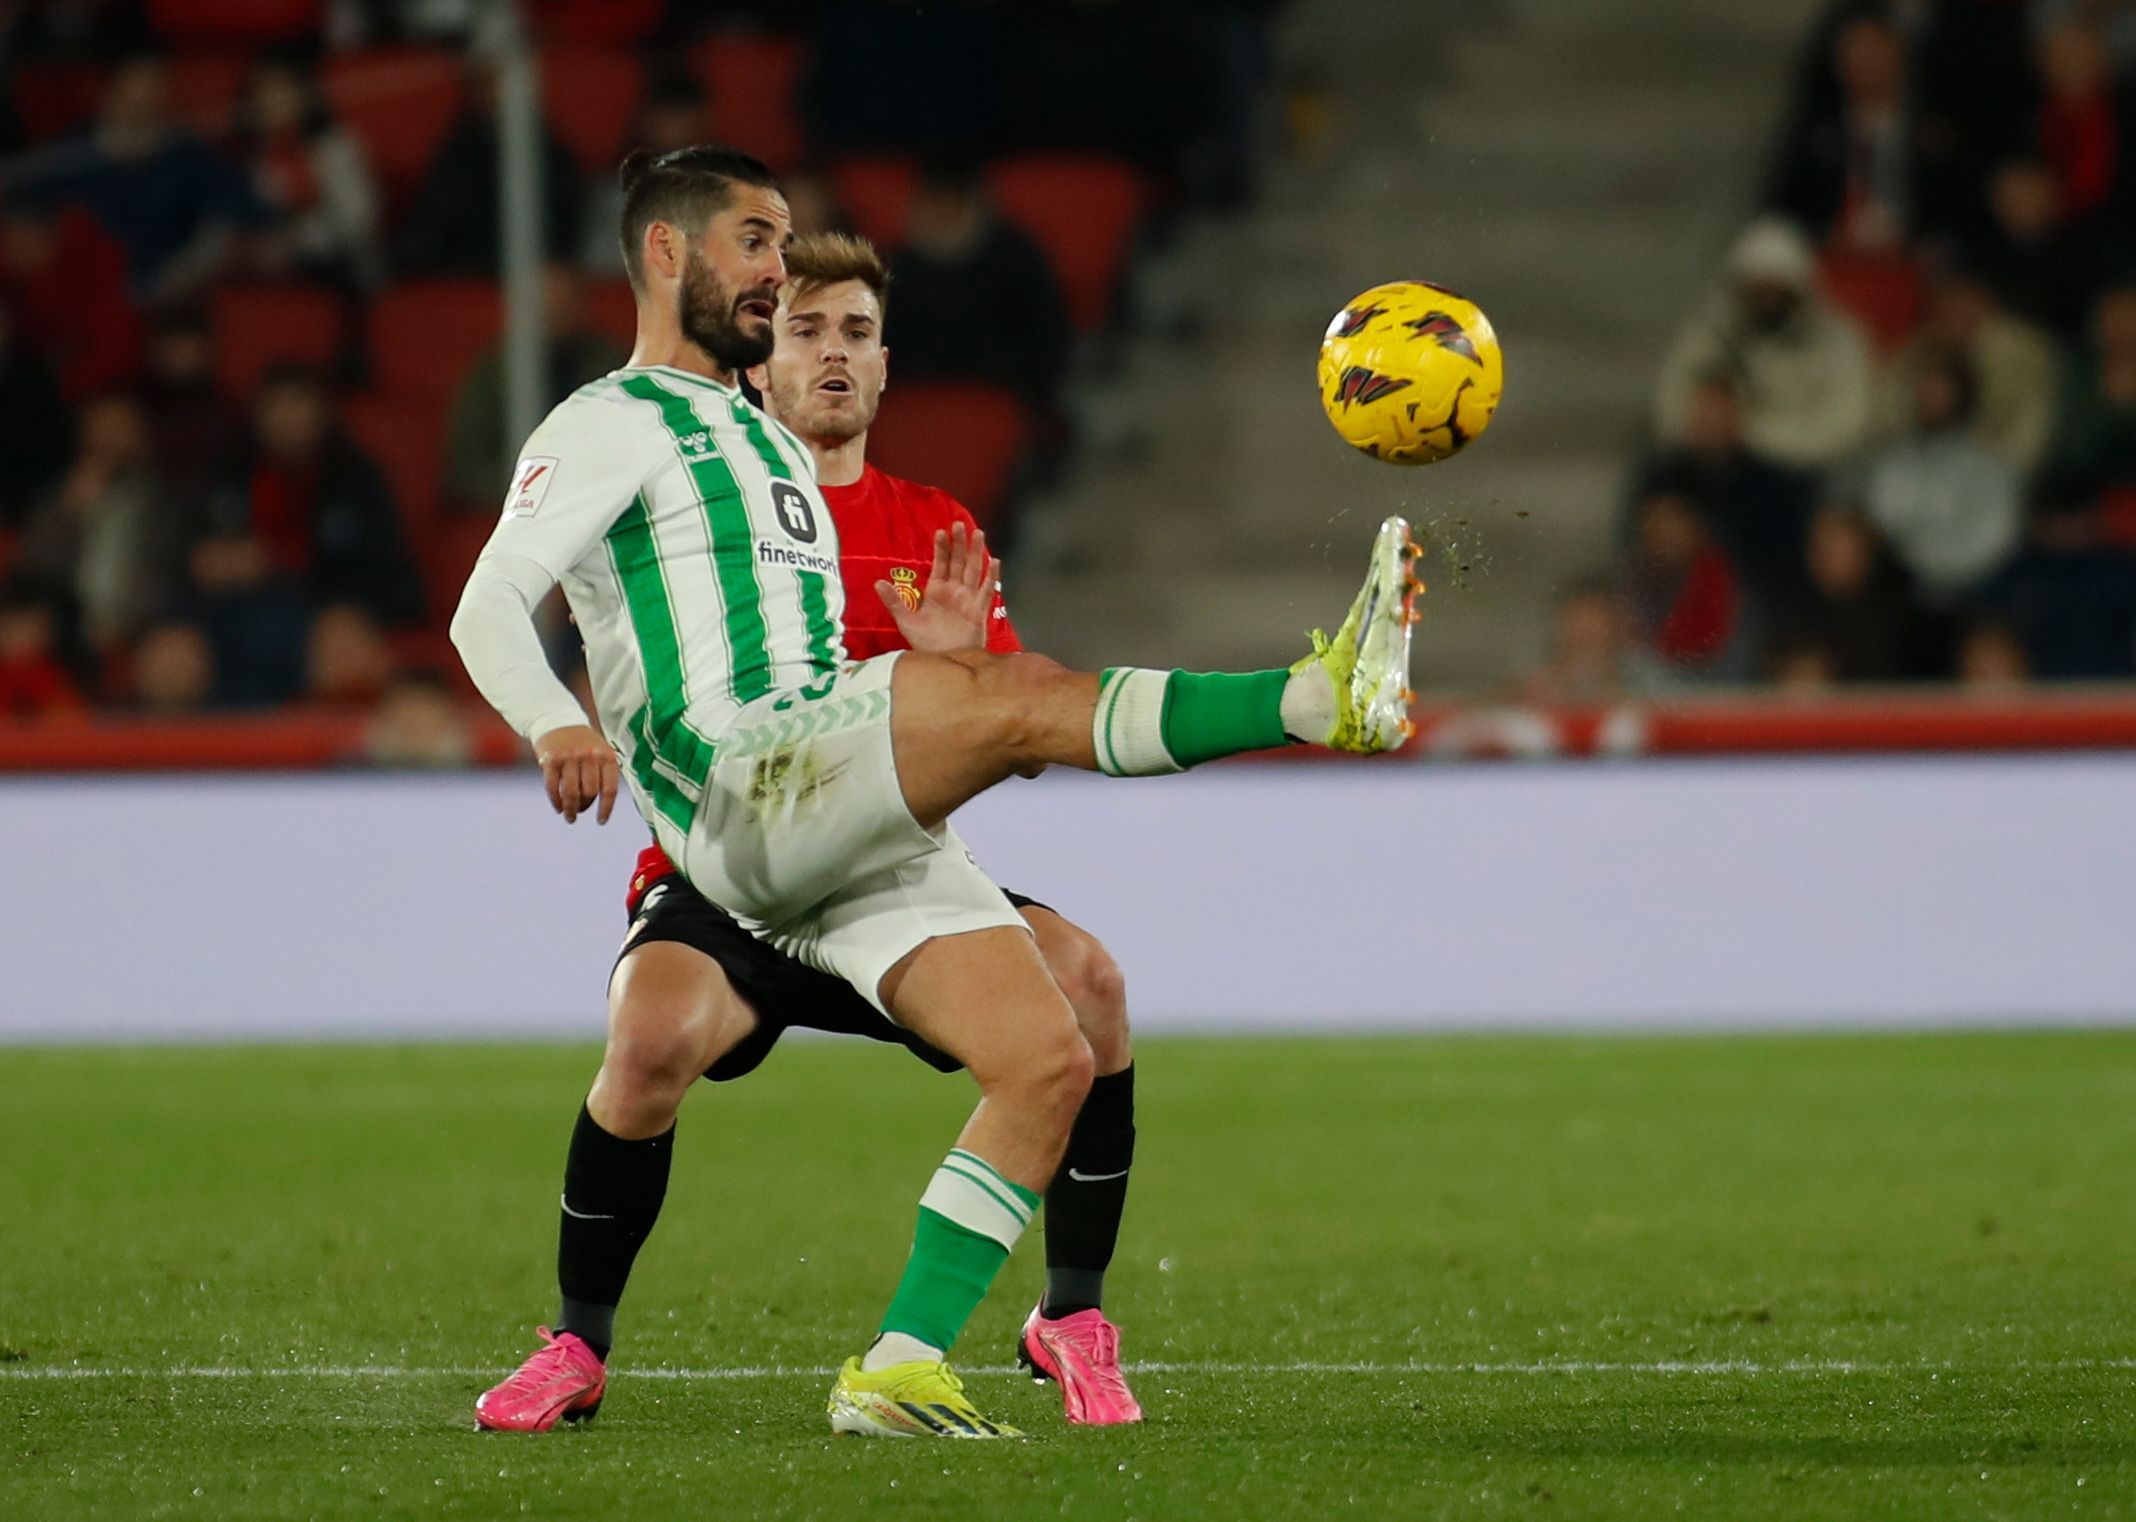 La Liga Matchday 23 preview: Girona face tough test before the fourth Madrid Derby of the season